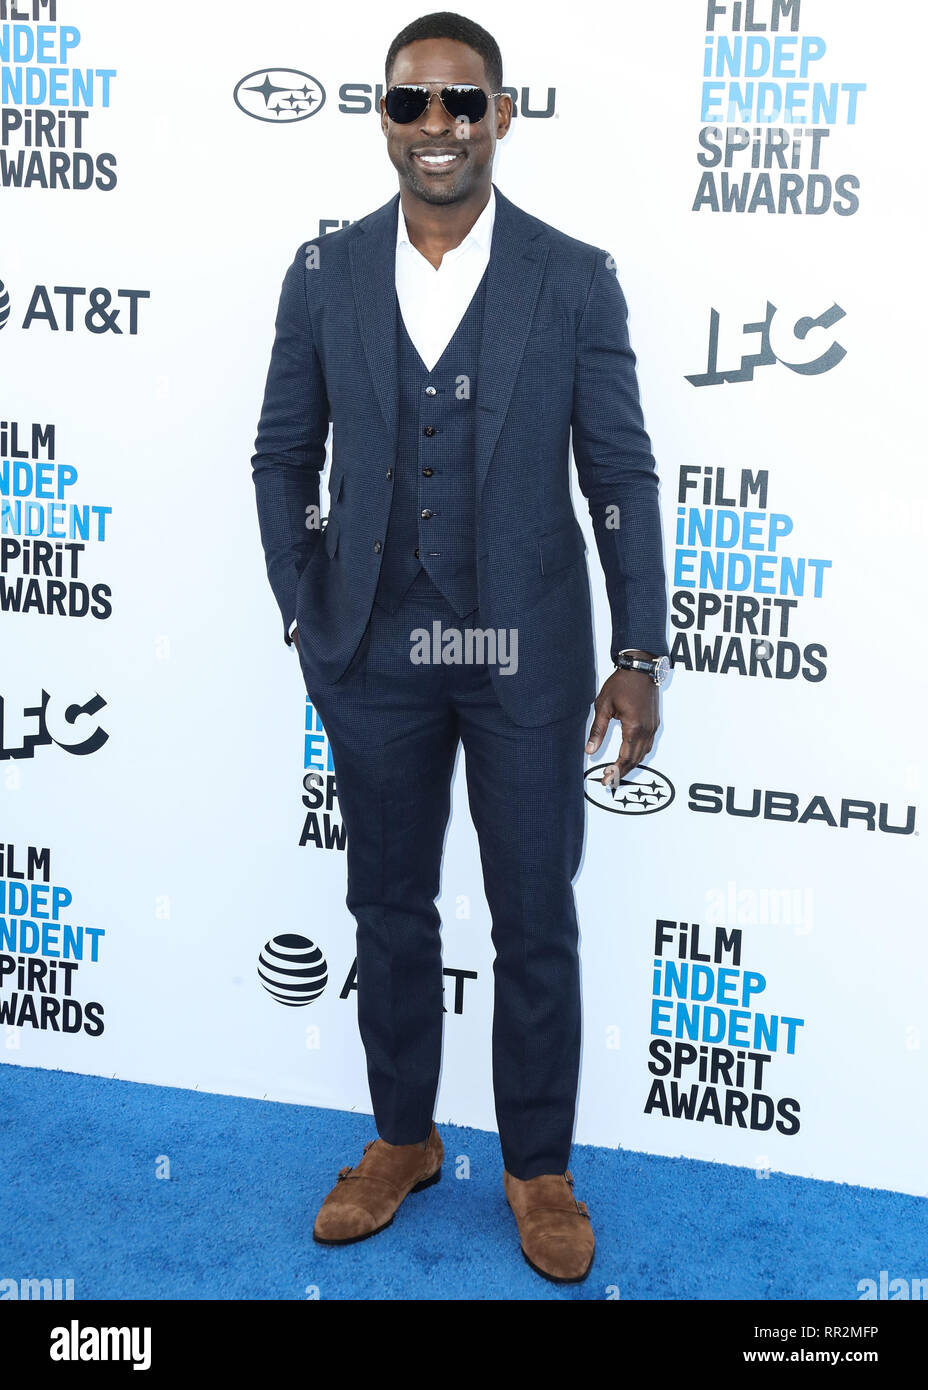 SANTA MONICA, LOS ANGELES, CA, USA - FEBRUARY 23: Actor Sterling K. Brown  wearing a Stile Latino suit, IWC watch, and Angela Mitchell shoes arrives  at the 2019 Film Independent Spirit Awards